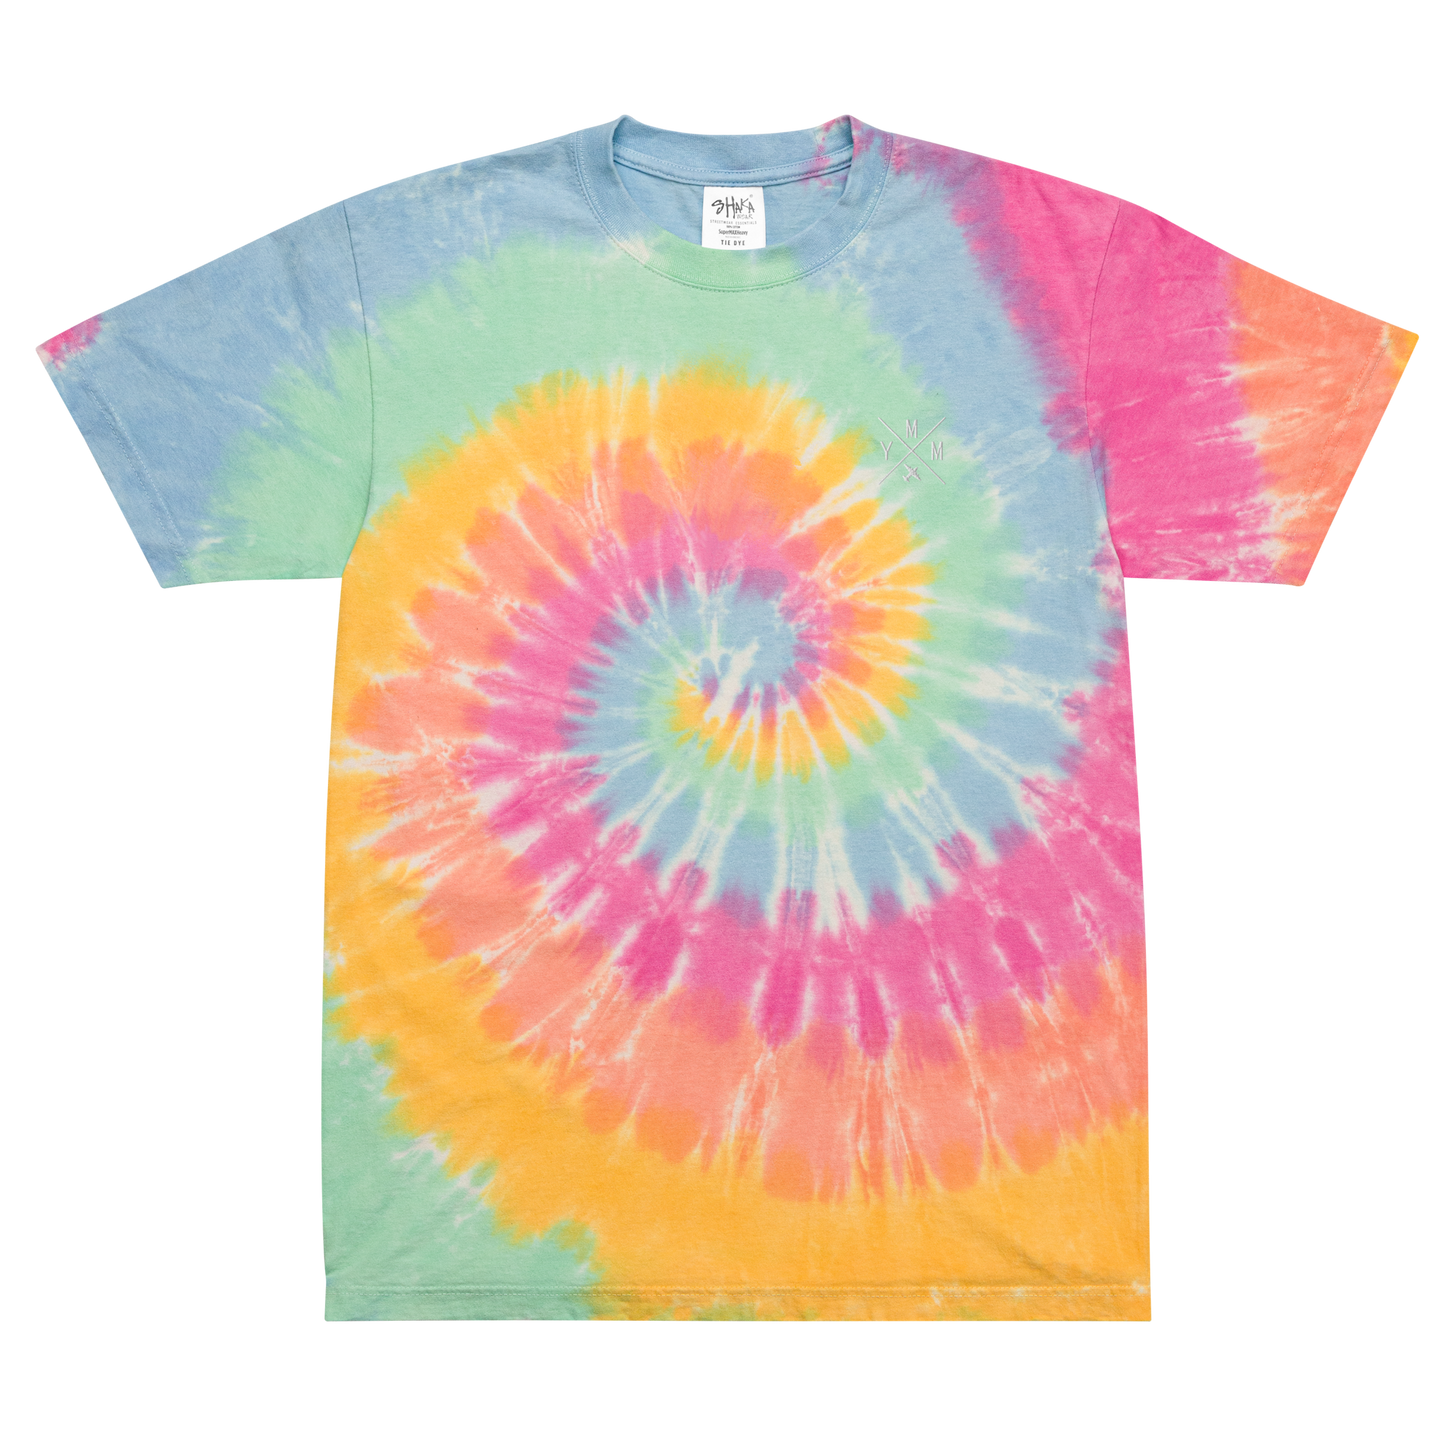 Crossed-X Oversized Tie-Dye T-Shirt • YMM Fort McMurray • YHM Designs - Image 02